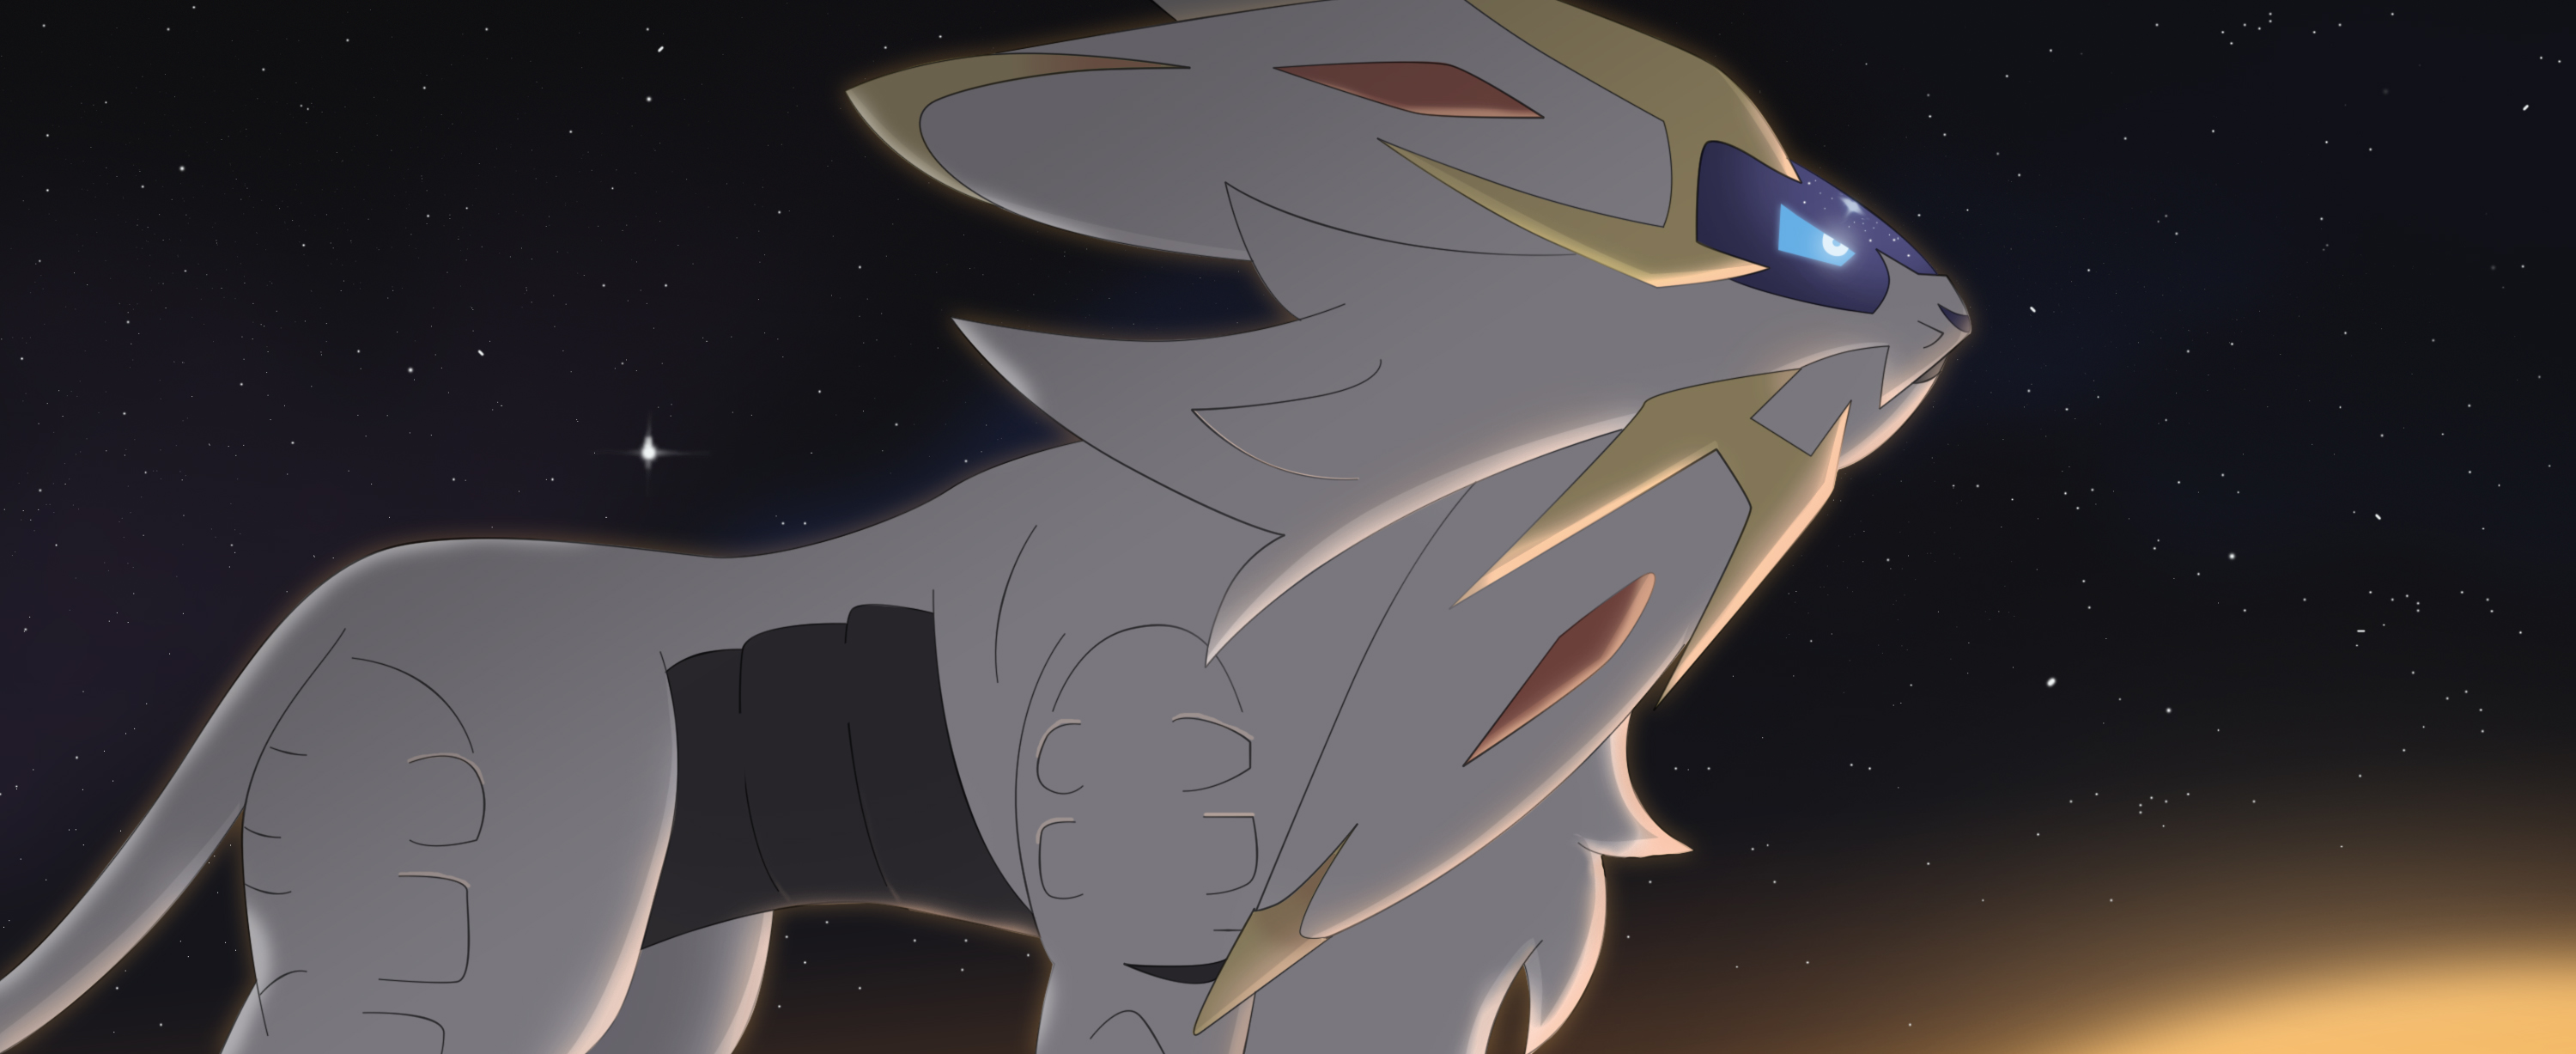 Solgaleo Pokemon Pokemon Pokemon Sun Pokemon Sun And Moon 3000x1227